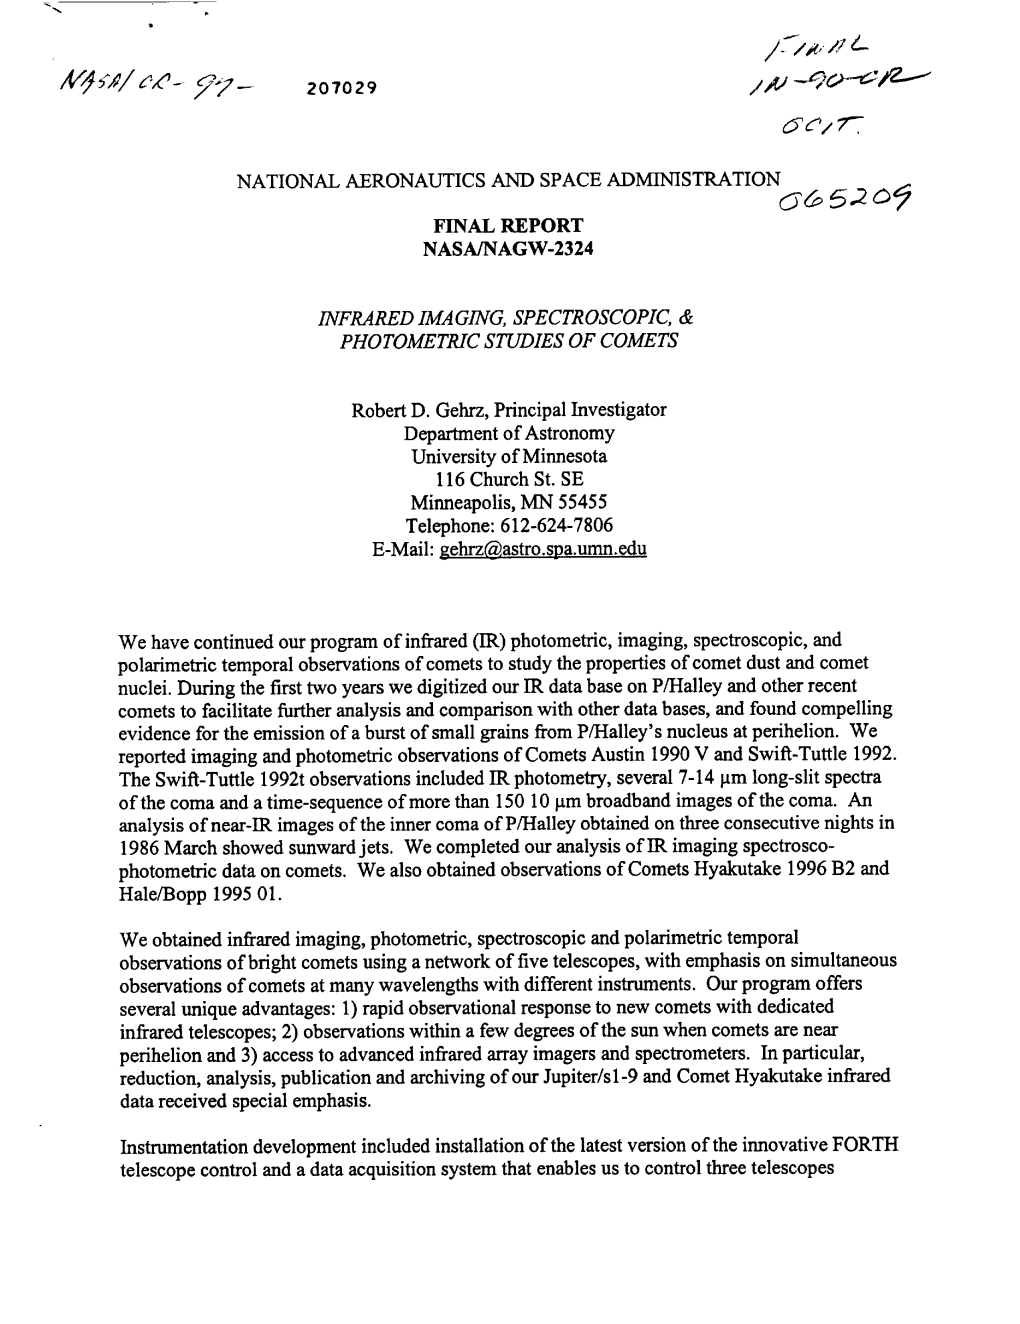 207029 D C/ 7"7, NATIONAL AERONAUTICS and SPACE ADMINISTRATION FINAL REPORT NASA/NAGW-2324 INFRARED IMAGING, SPECTROSCOPIC